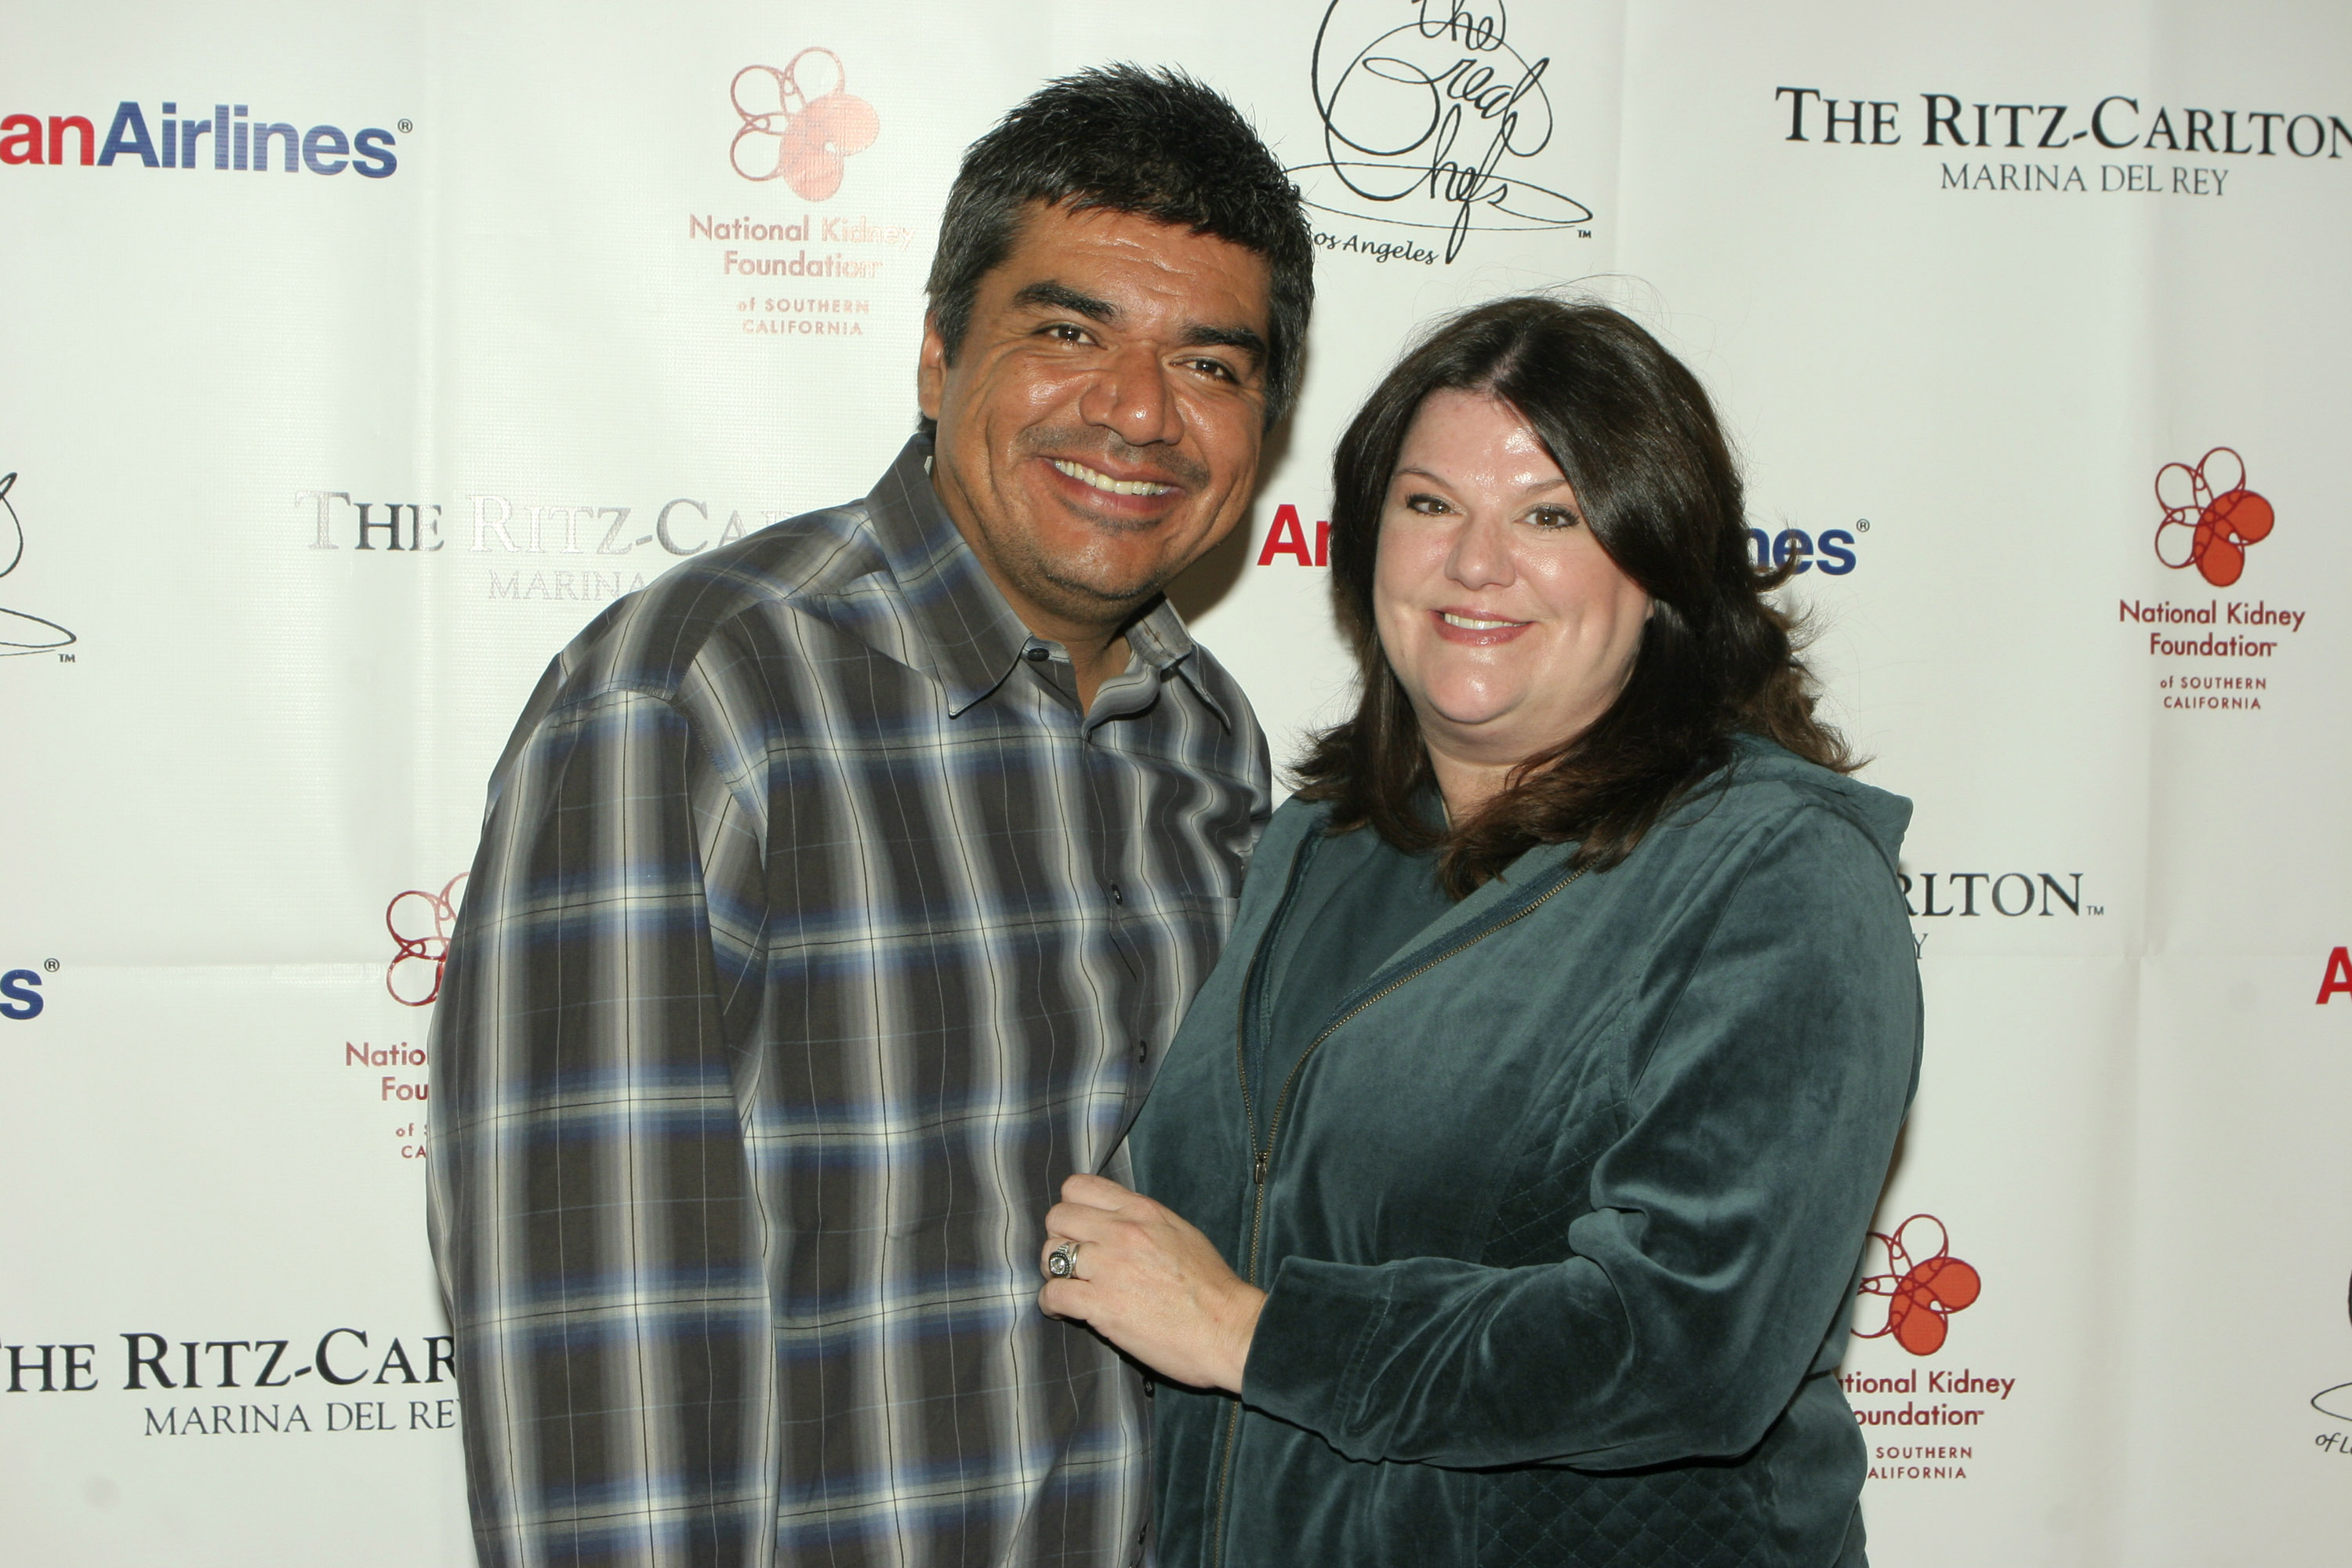 George Lopez and Ann Serrano during the George Lopez/Great Chefs of LA event at the Ritz-Carlton Marina del Rey on November 12, 2006 in Marina del Rey, California  | Source: Getty Images